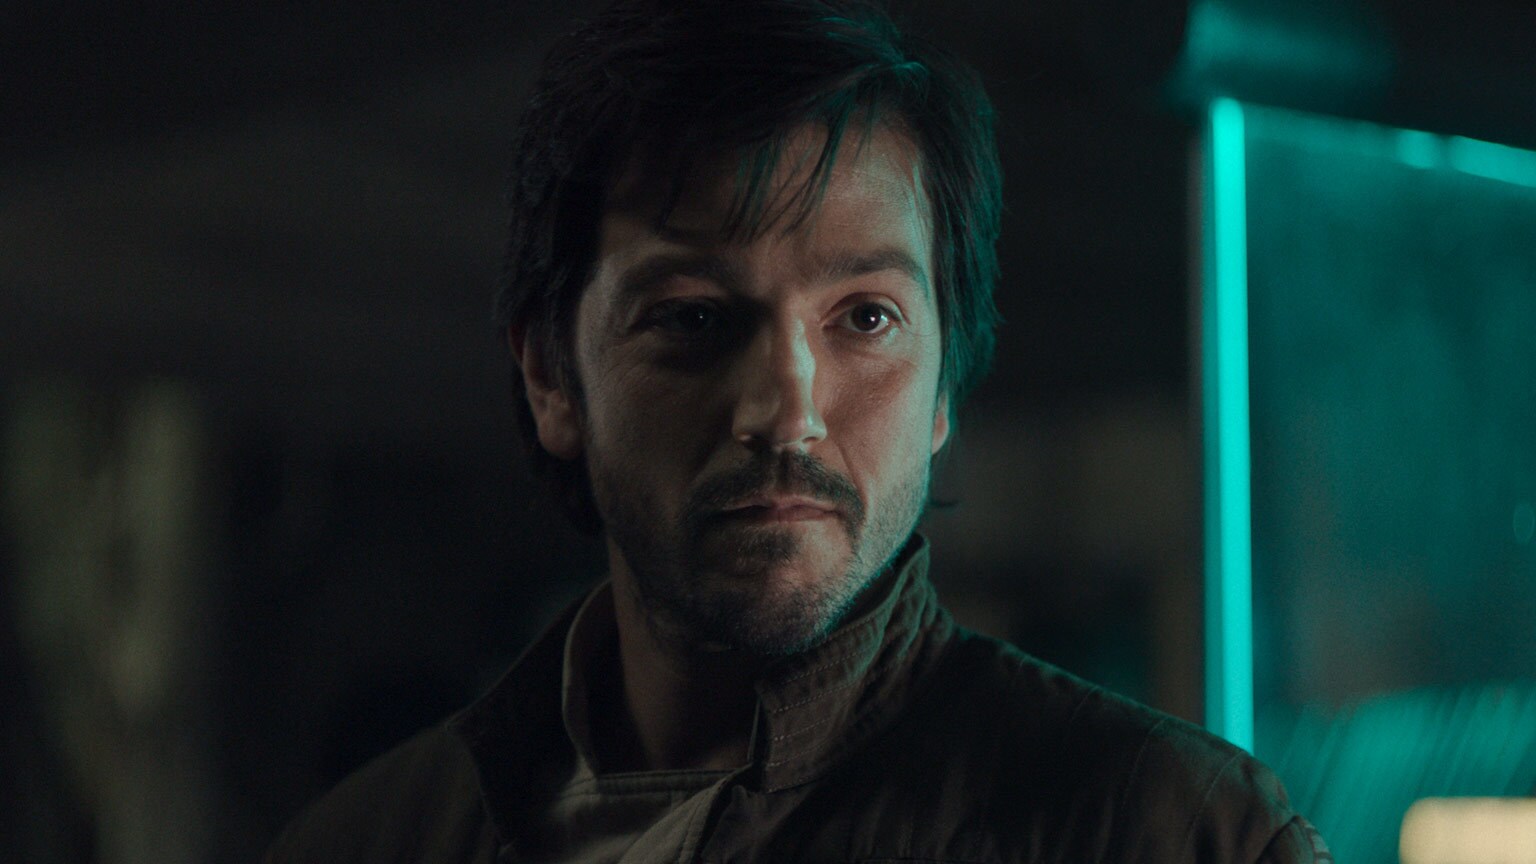 Cassian Andor 101: The Story of a Rebel